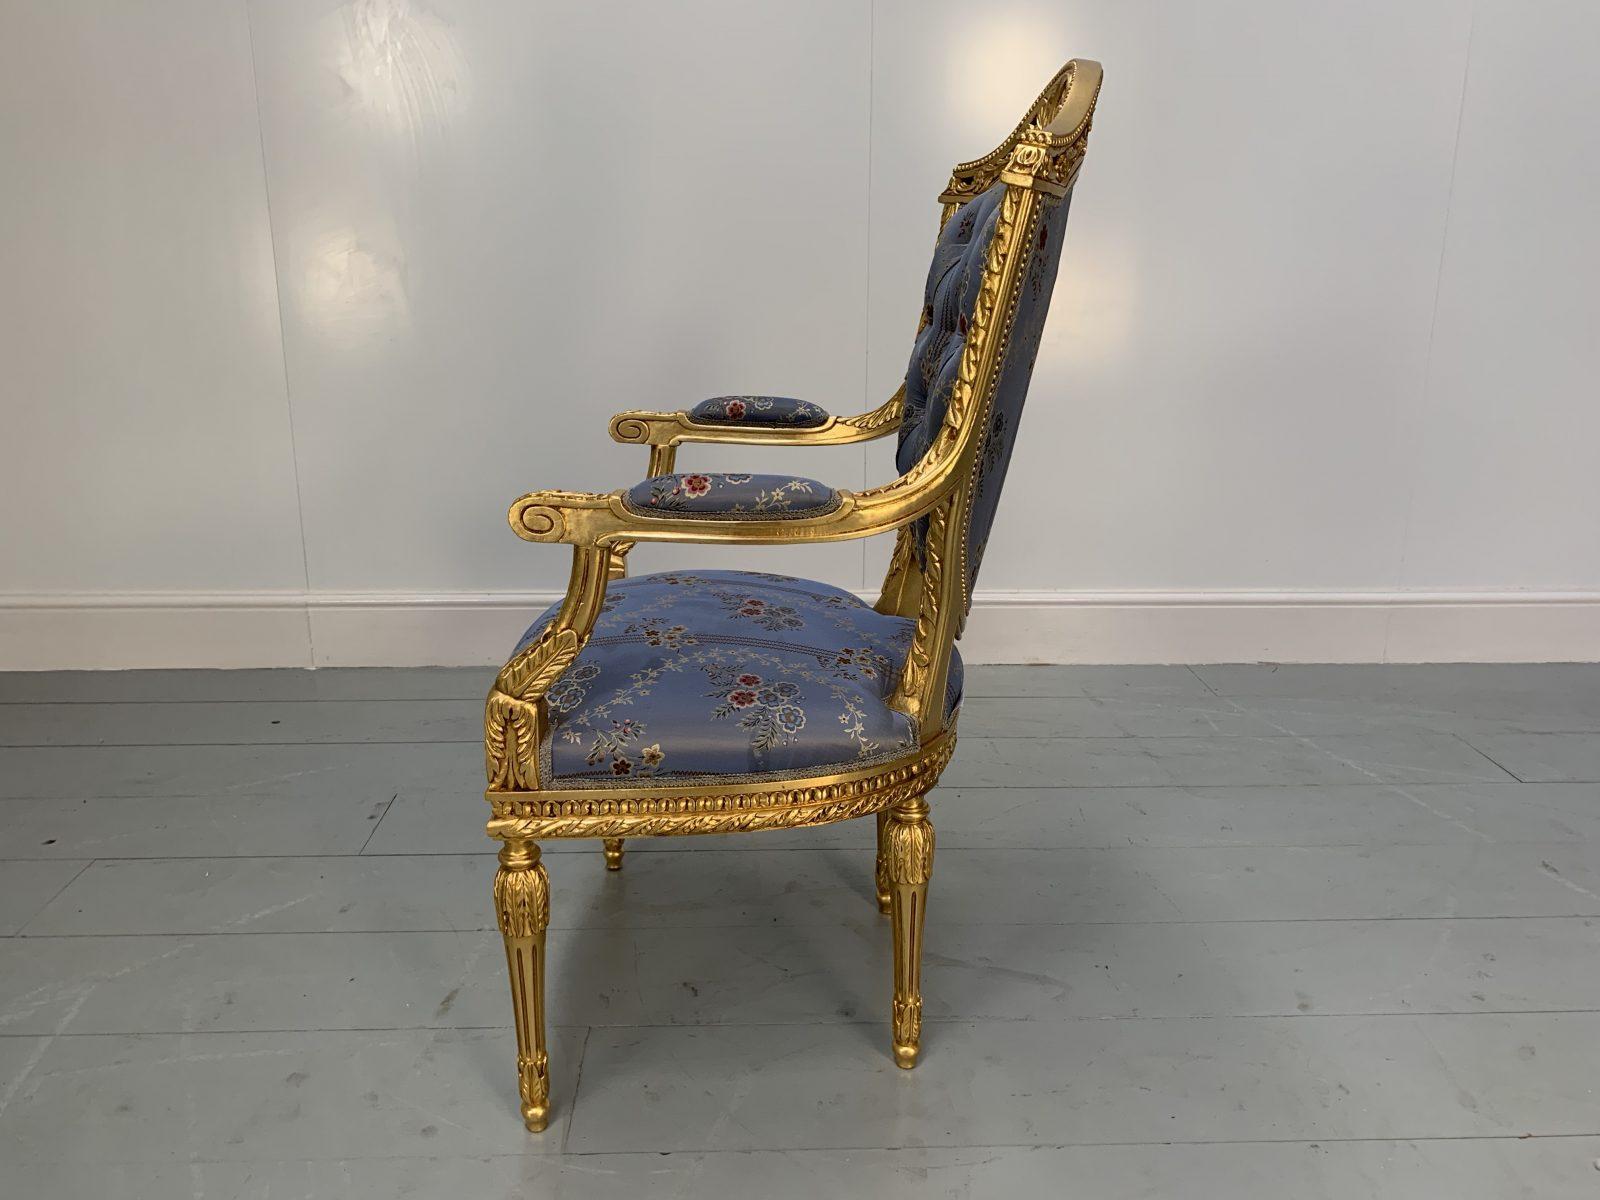 Contemporary Pair of Asnaghi Fauteuil Baroque Rococo Armchairs in Floral Silk and Gilt For Sale